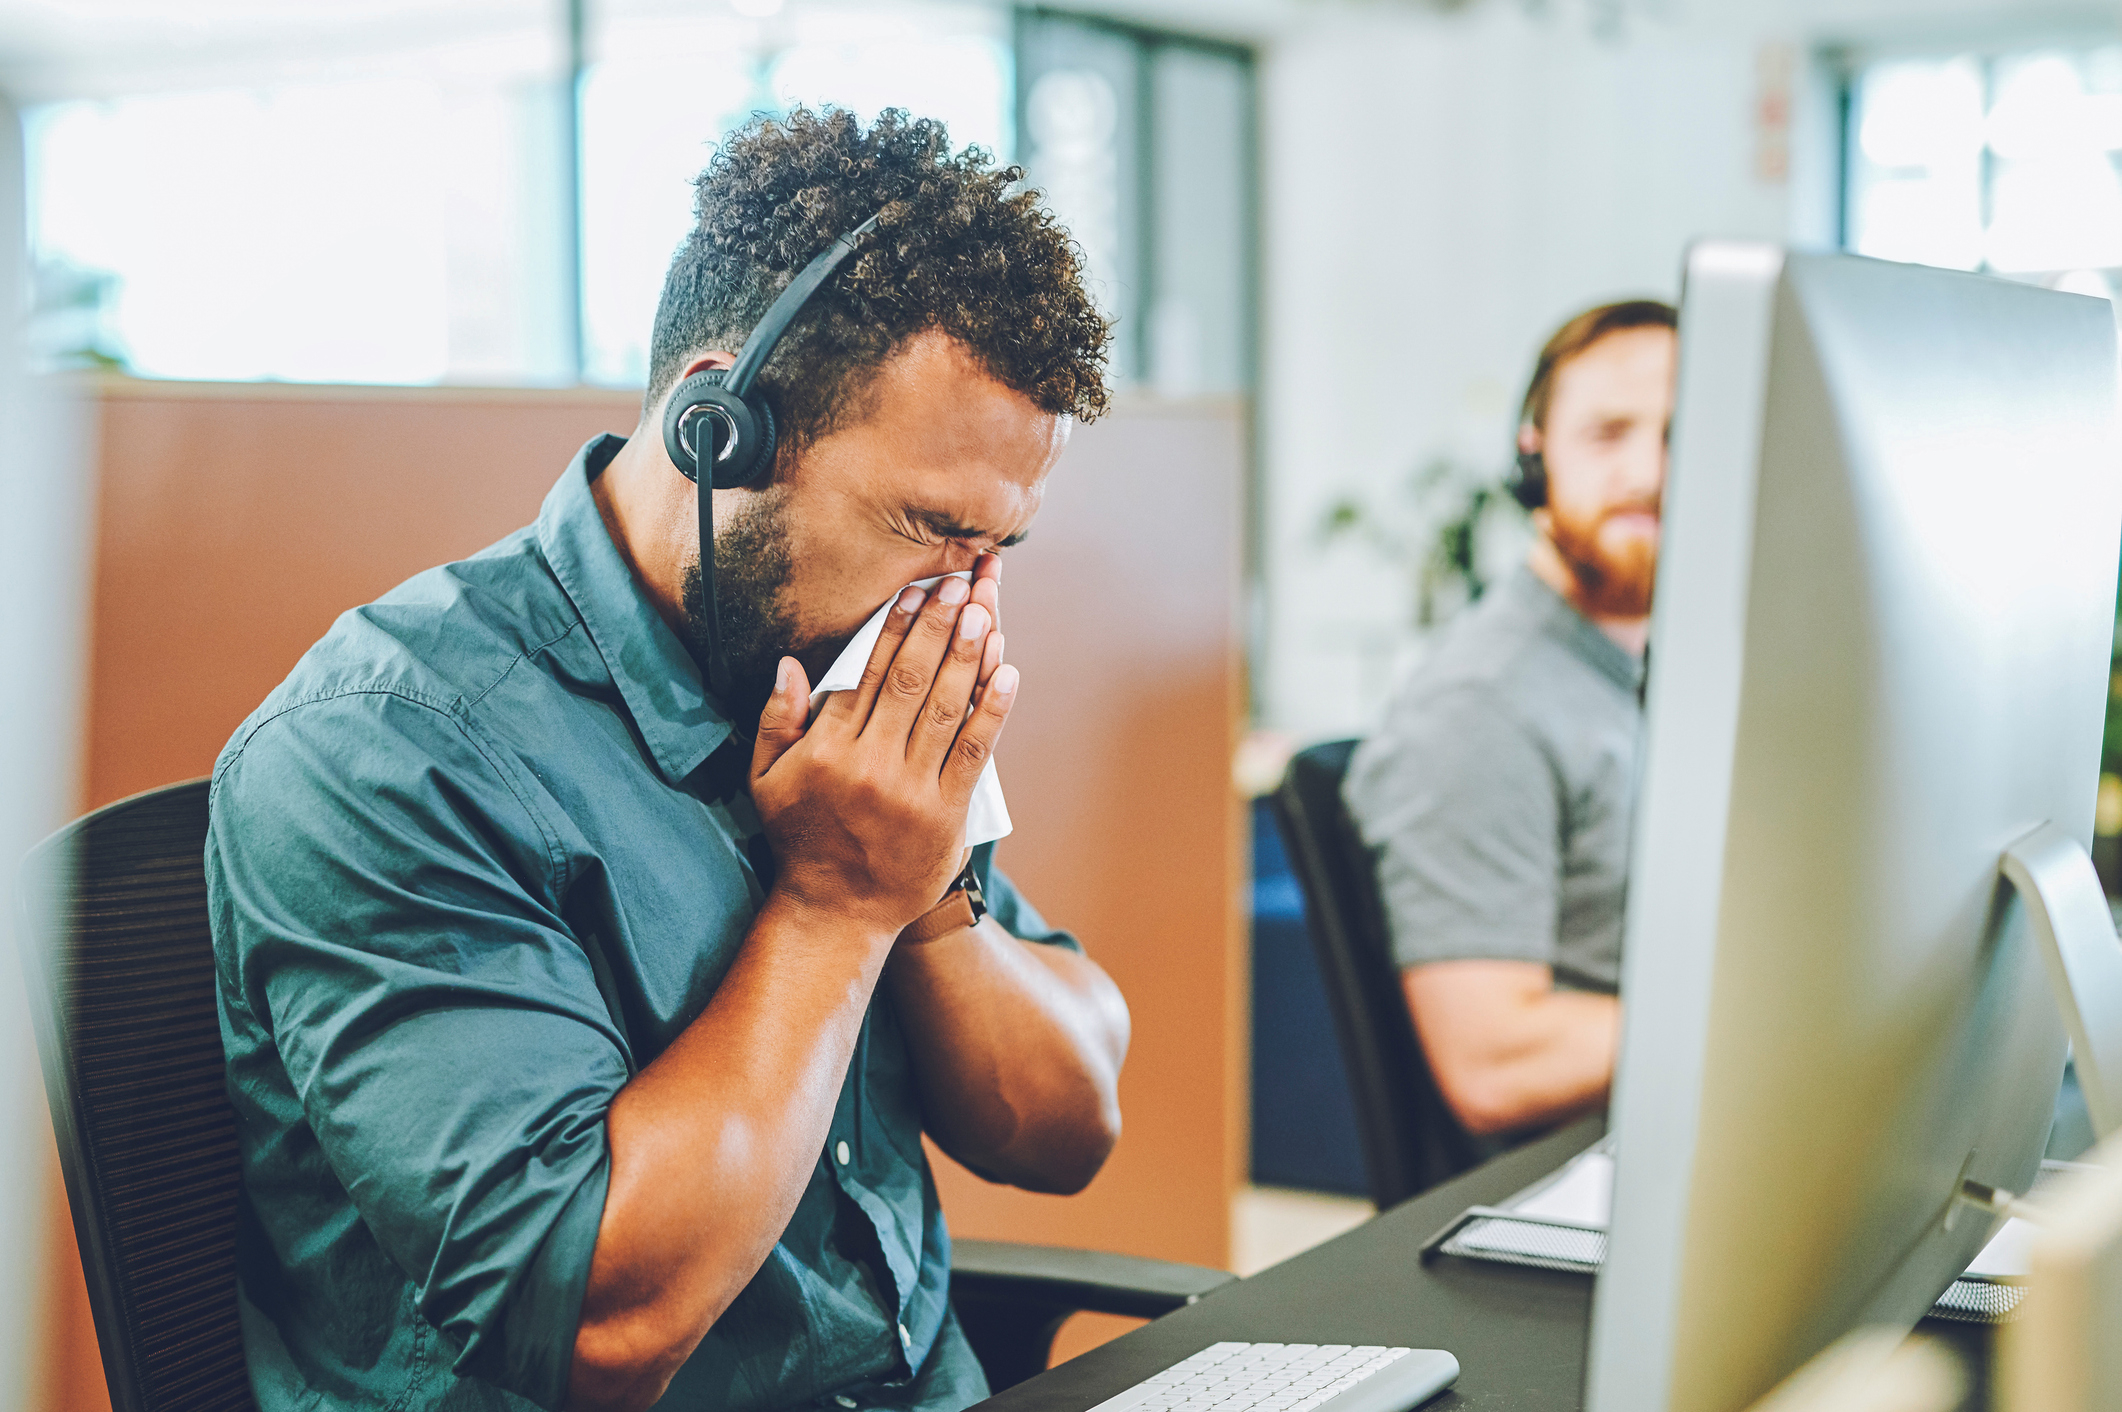 A man in an office wearing a headset blows his nose while another man works at the back